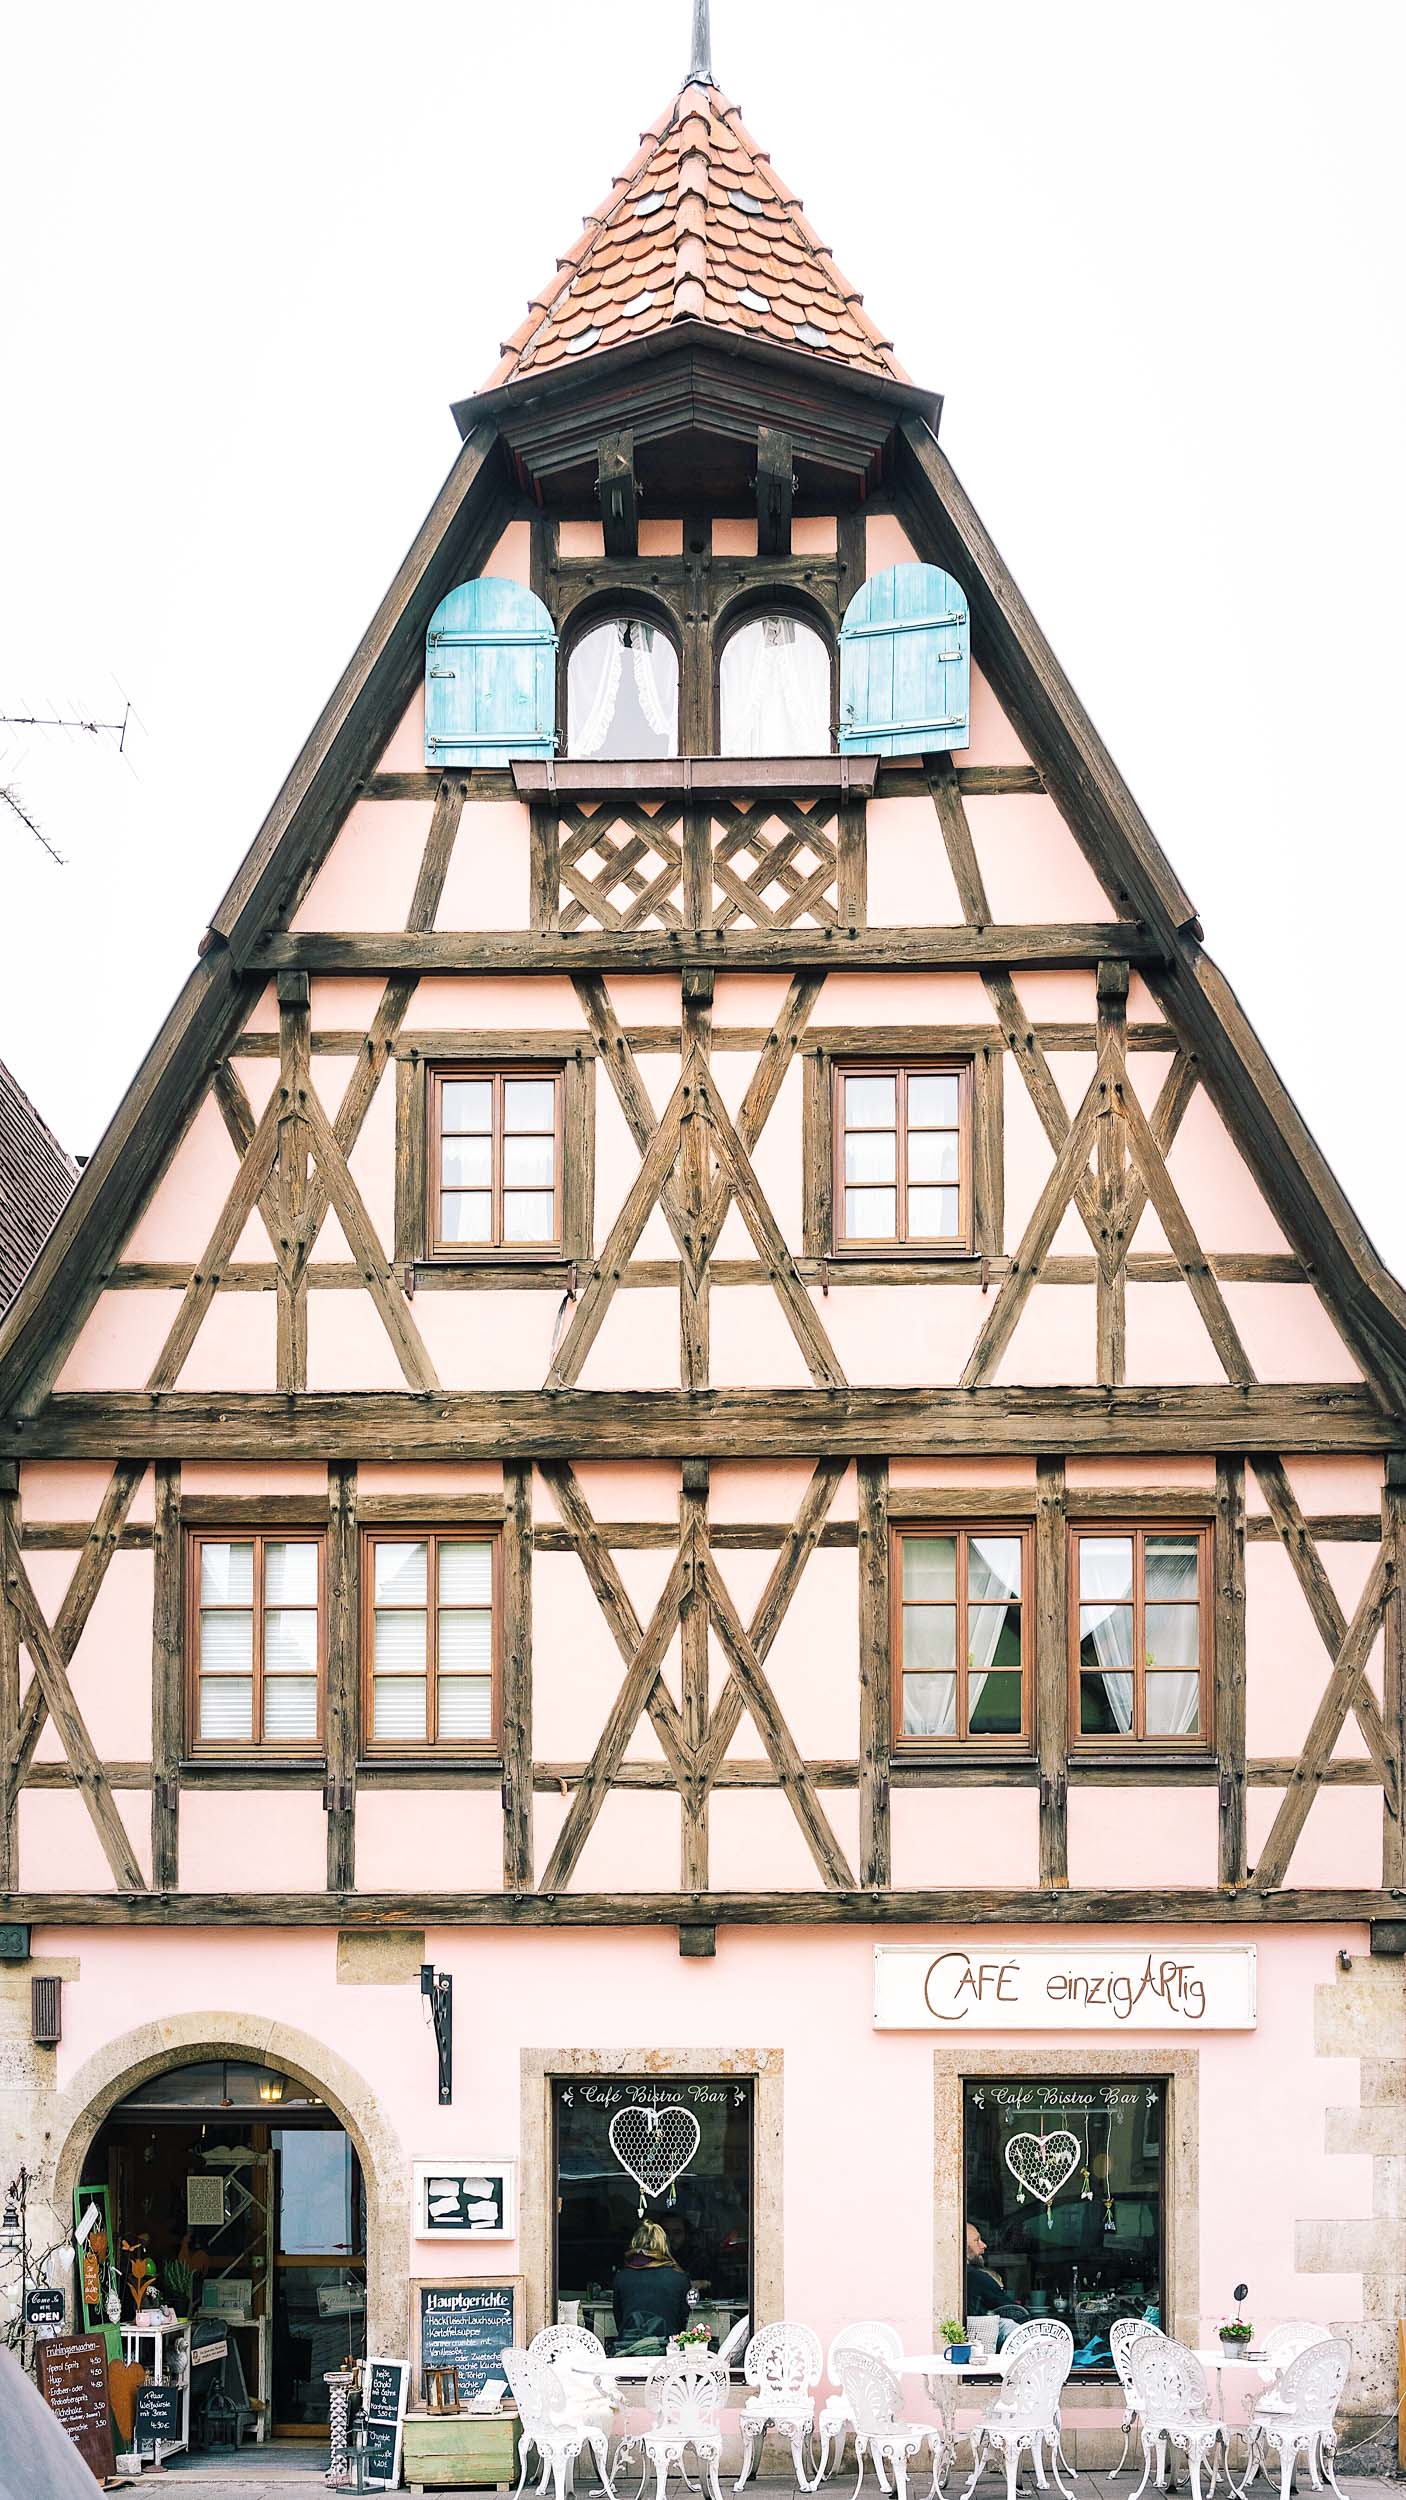 Typical German style buildings in Rothenburg